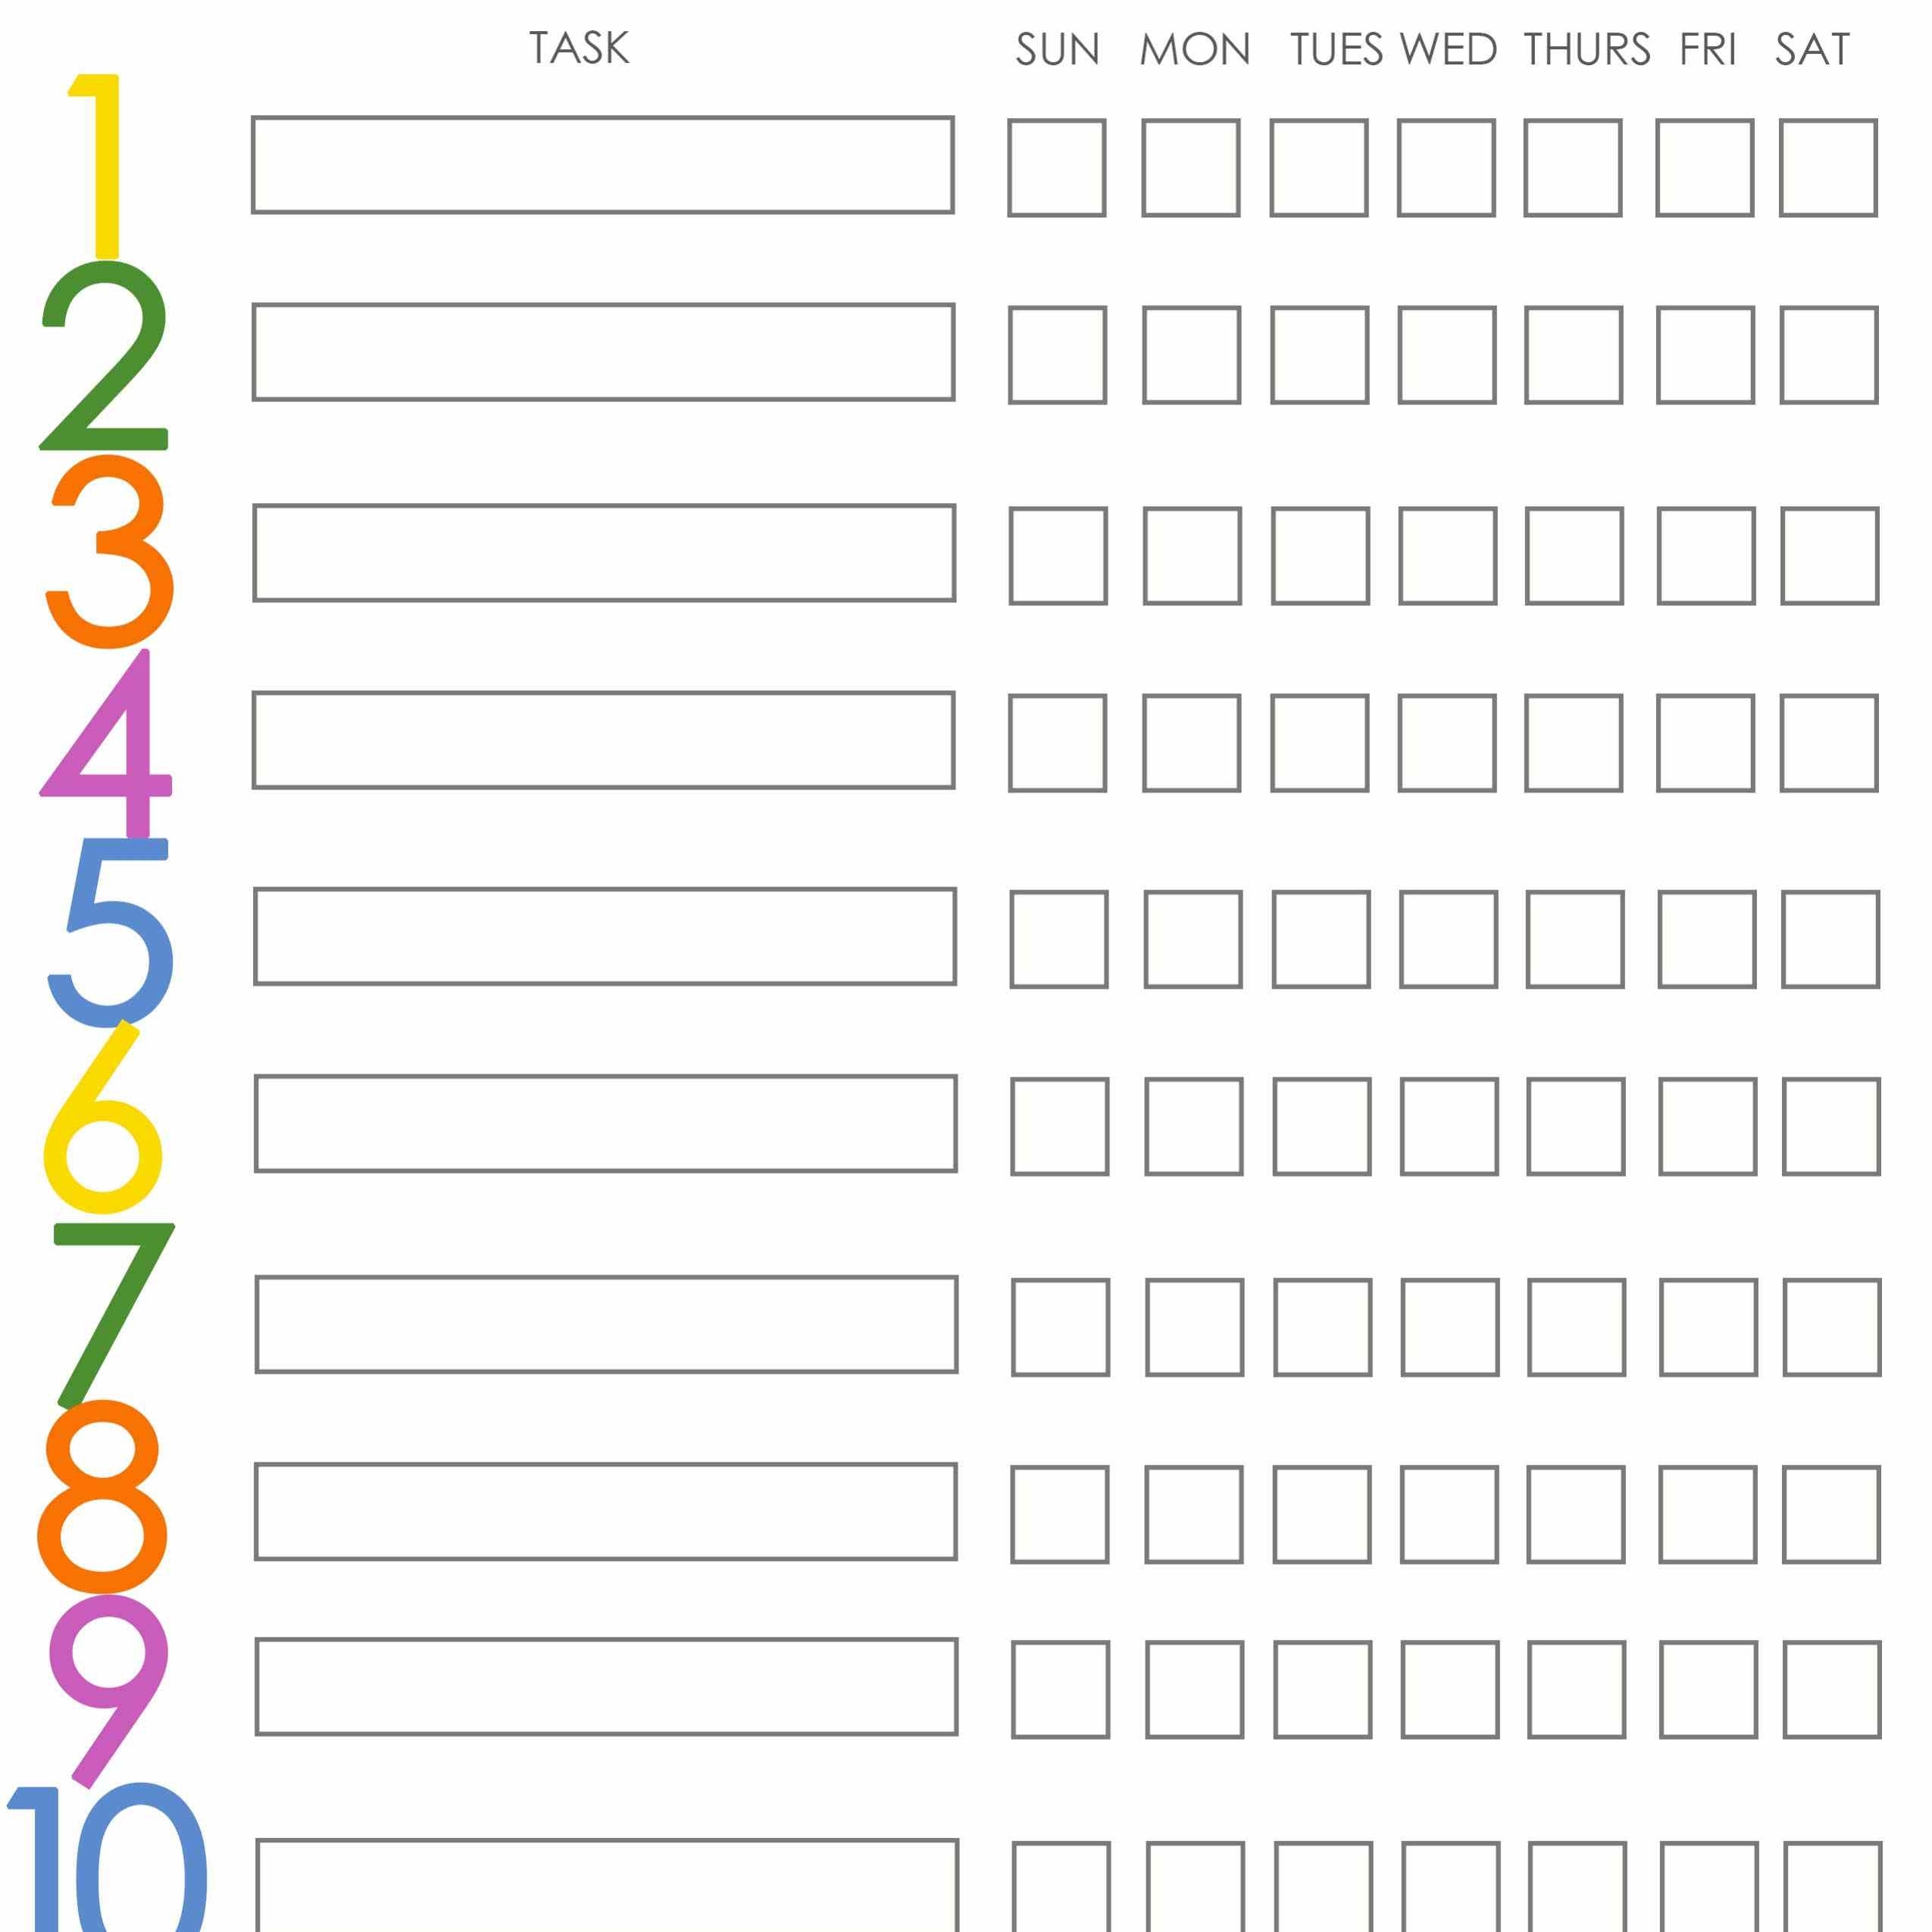 Free Printable Weekly Chore Charts within Blank Free Printable Star Charts Monday Thru Friday